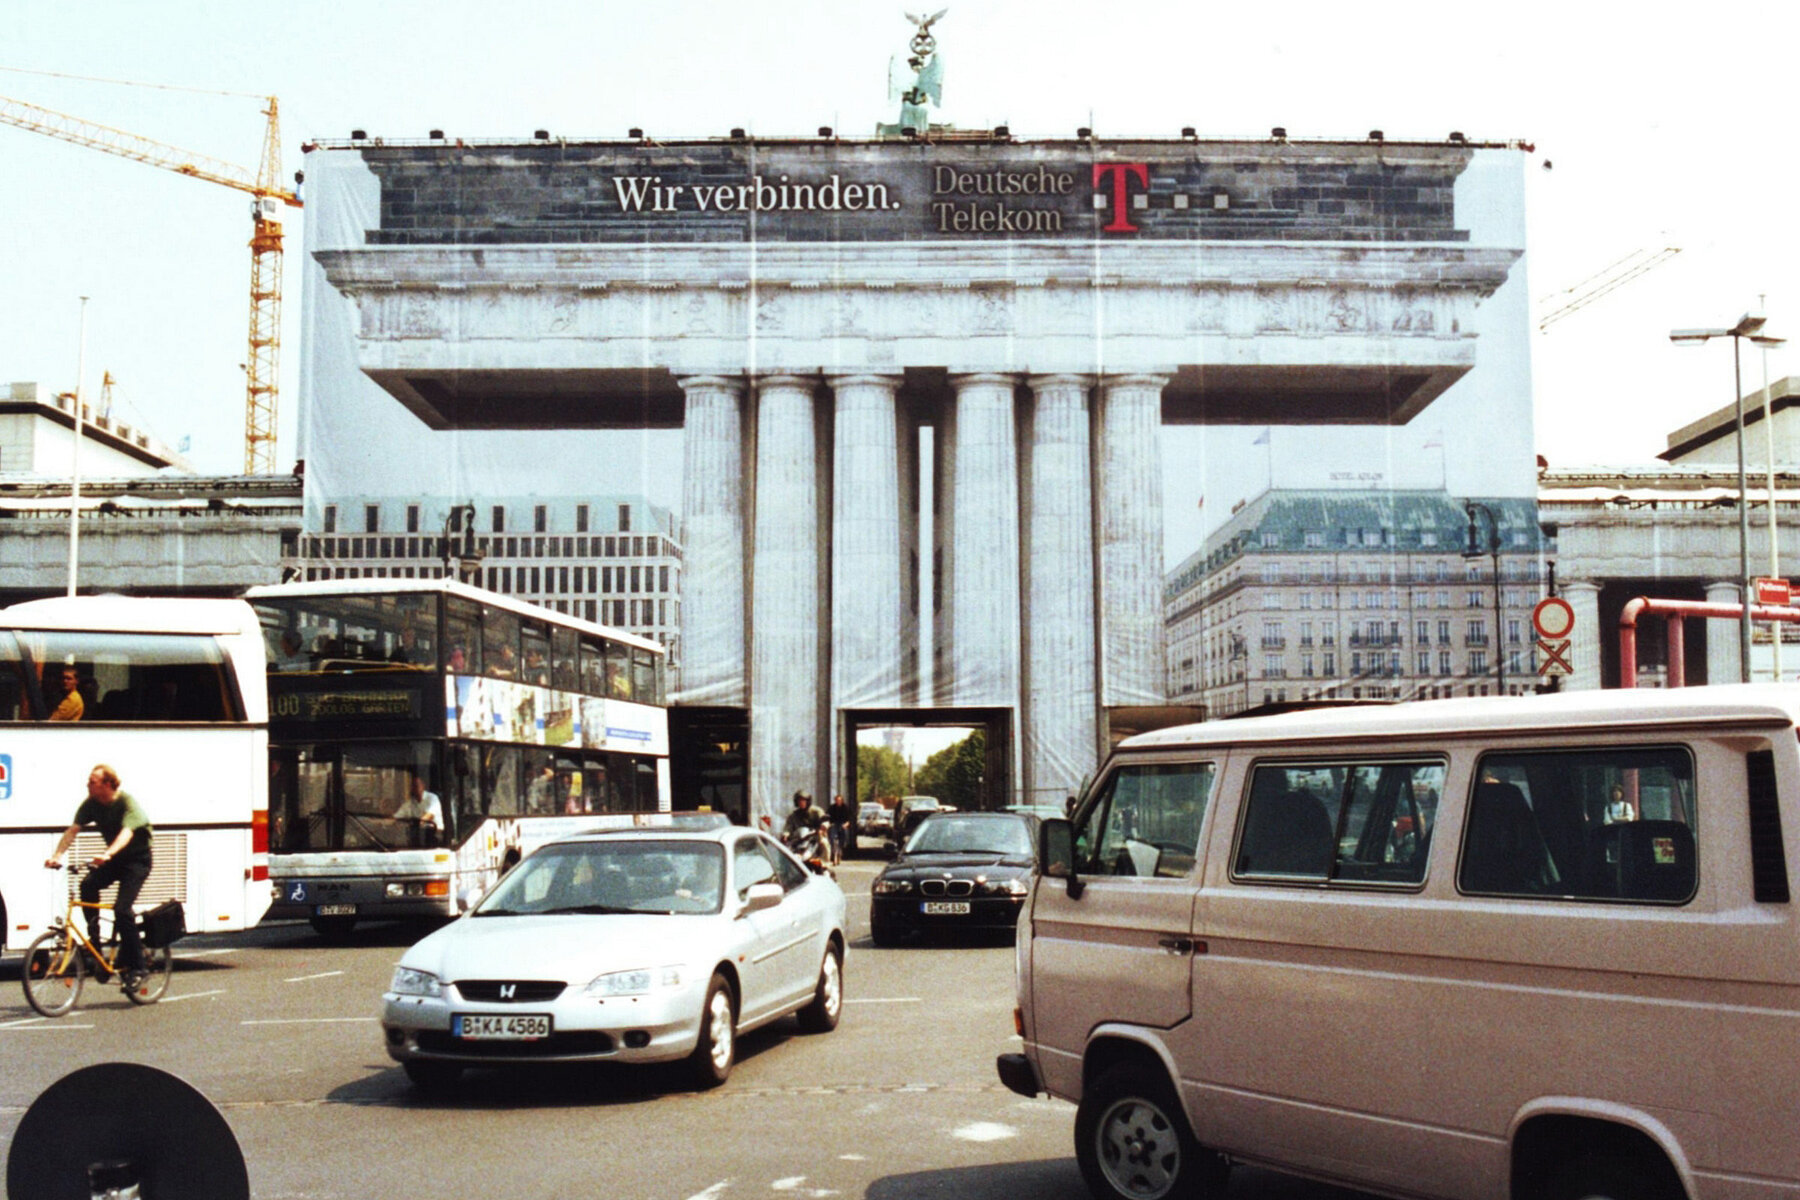 The Brandenburg Gate is covered by an advertisement banner of the Deutsche Telekom. The banner depicts the adjacent buildings and parts of the Gate. At that time, cars are able to drive through the centre of the Gate. 